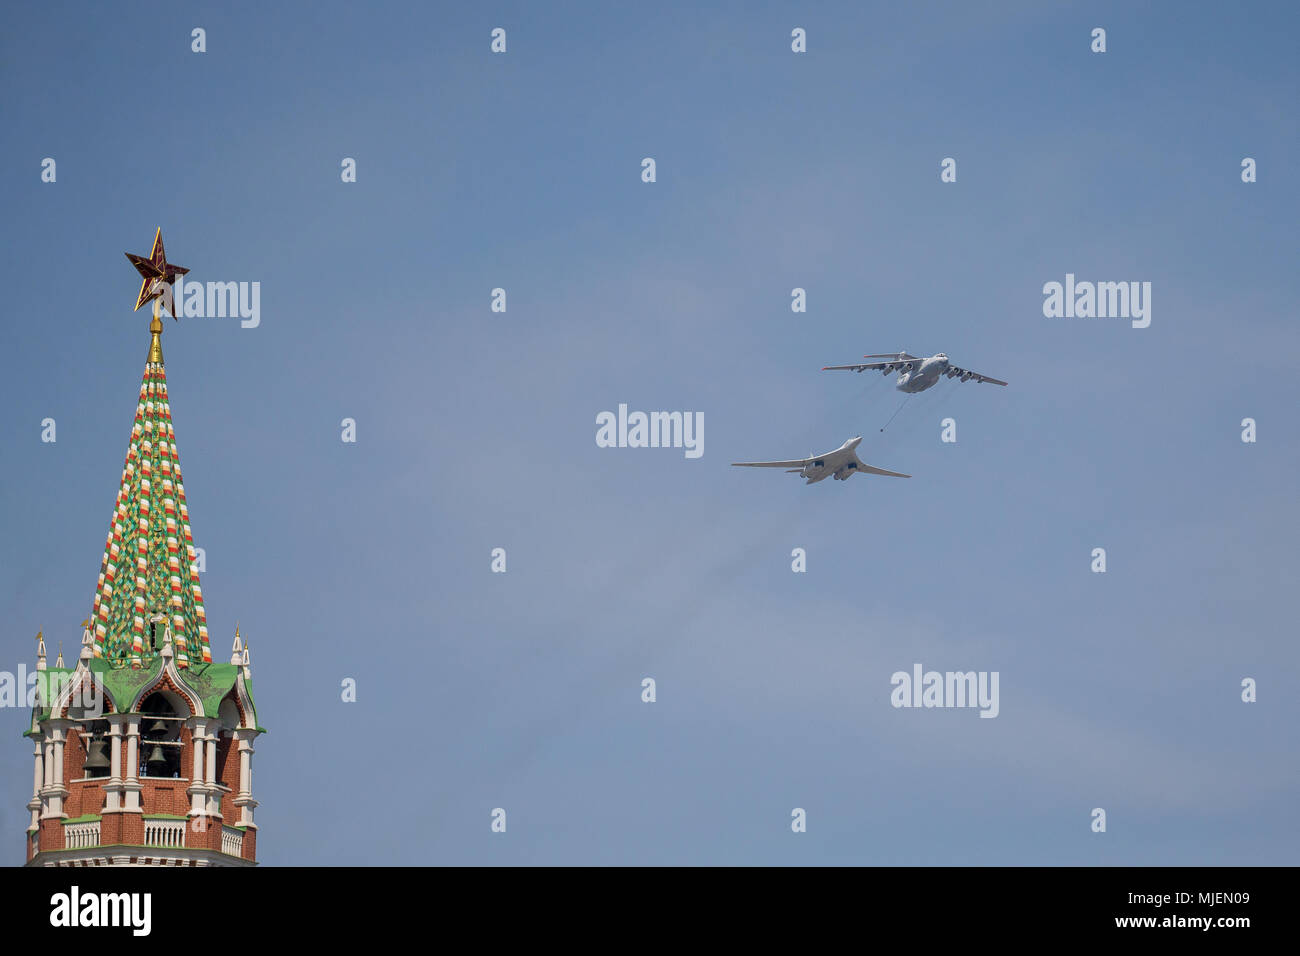 Moscow, Russia. 4th May, 2018. Russian Air Force Ilyushin Il-78 refuelling tanker and a Tupolev Tu-160 strategic bomber aircraft during a rehearsal of the upcoming Victory Day air show marking the 73rd anniversary of the victory over Nazi Germany in the 1941-45 Great Patriotic War, the Eastern Front of World War II. Credit: Victor Vytolskiy/Alamy Live News Stock Photo